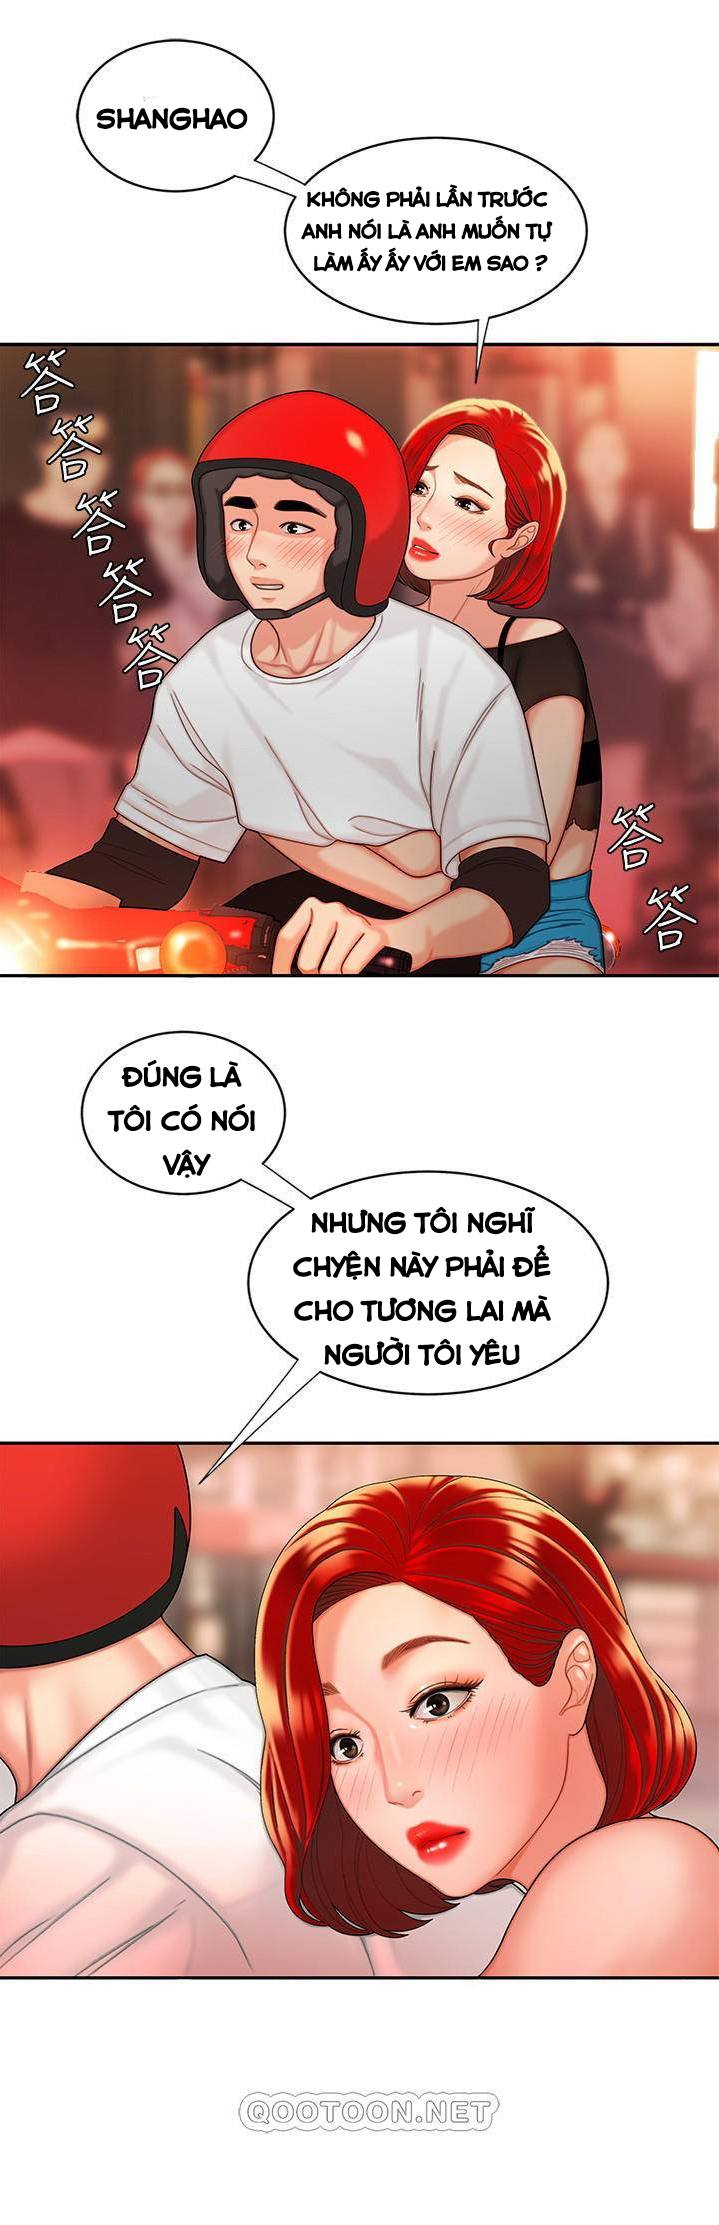 Chapter 006 : Chapter 06 ảnh 39